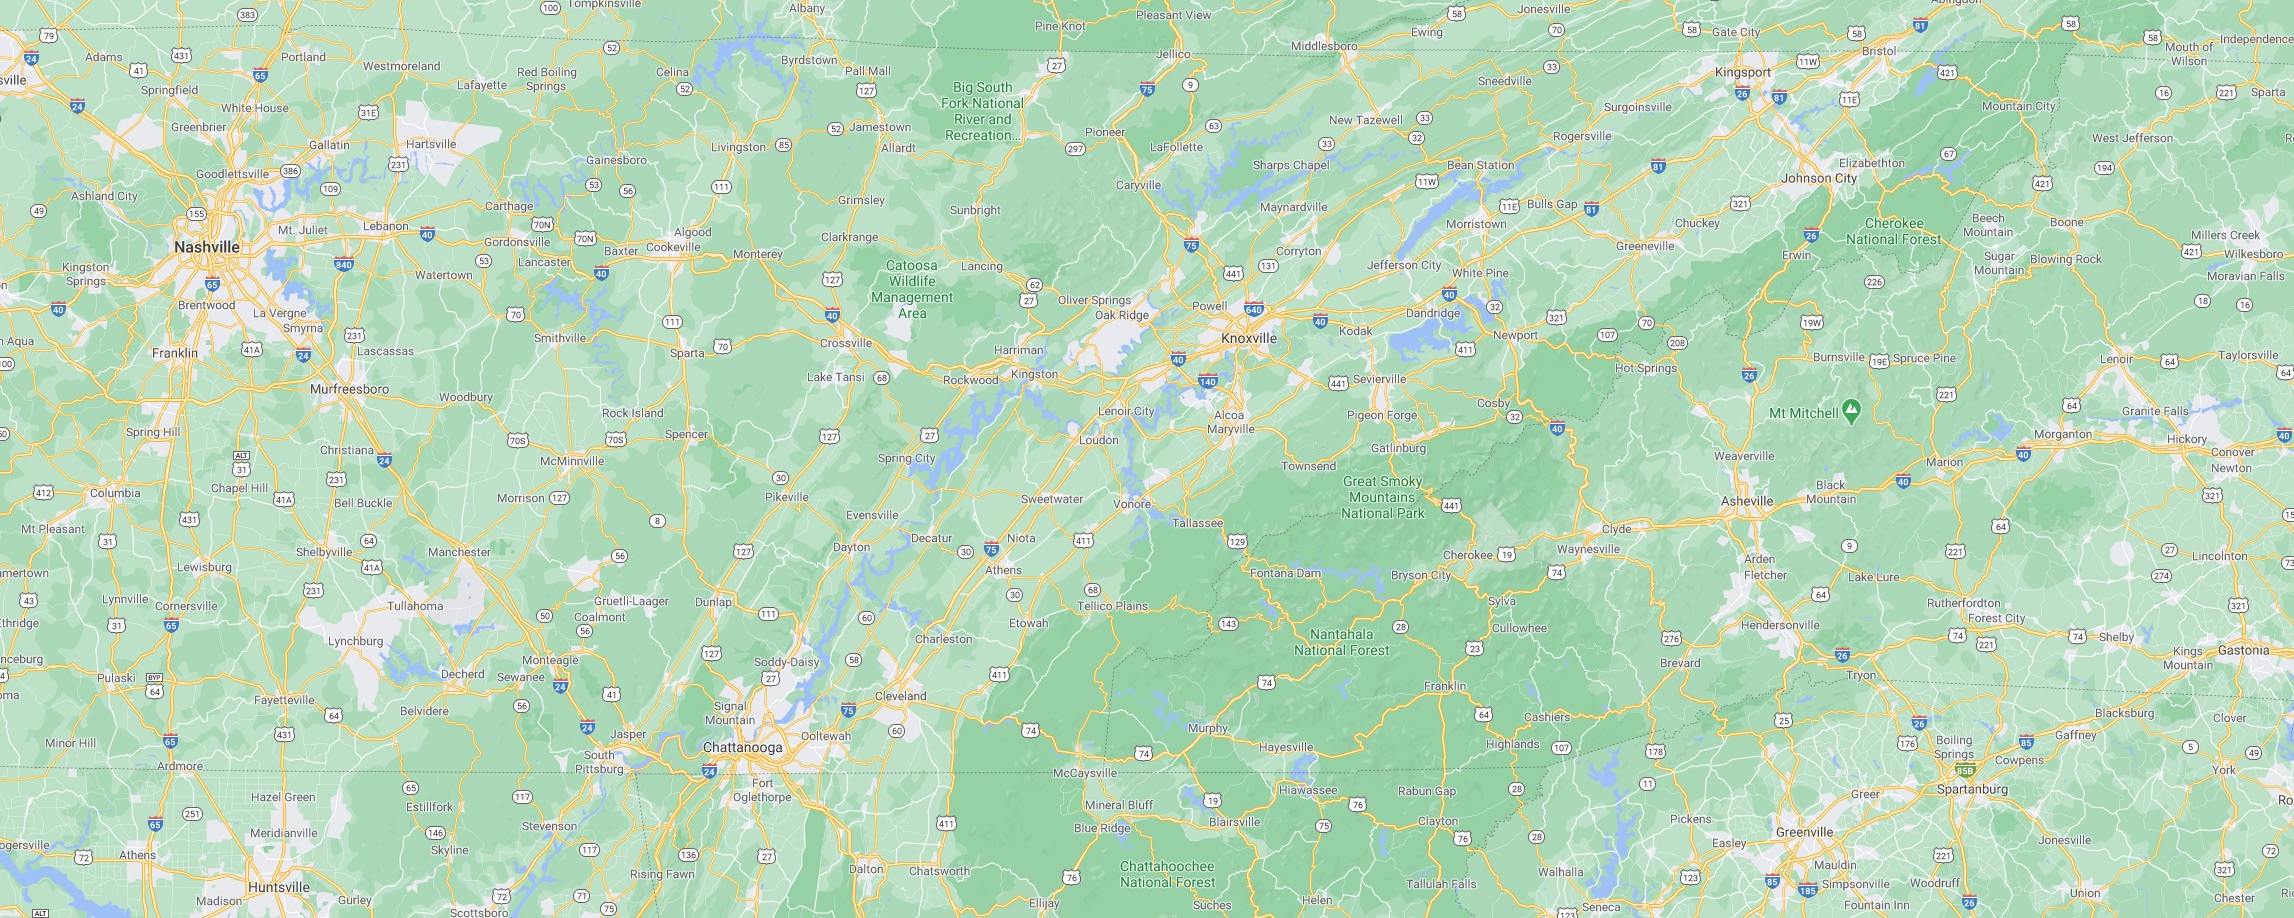 Google_Maps-Tennessee